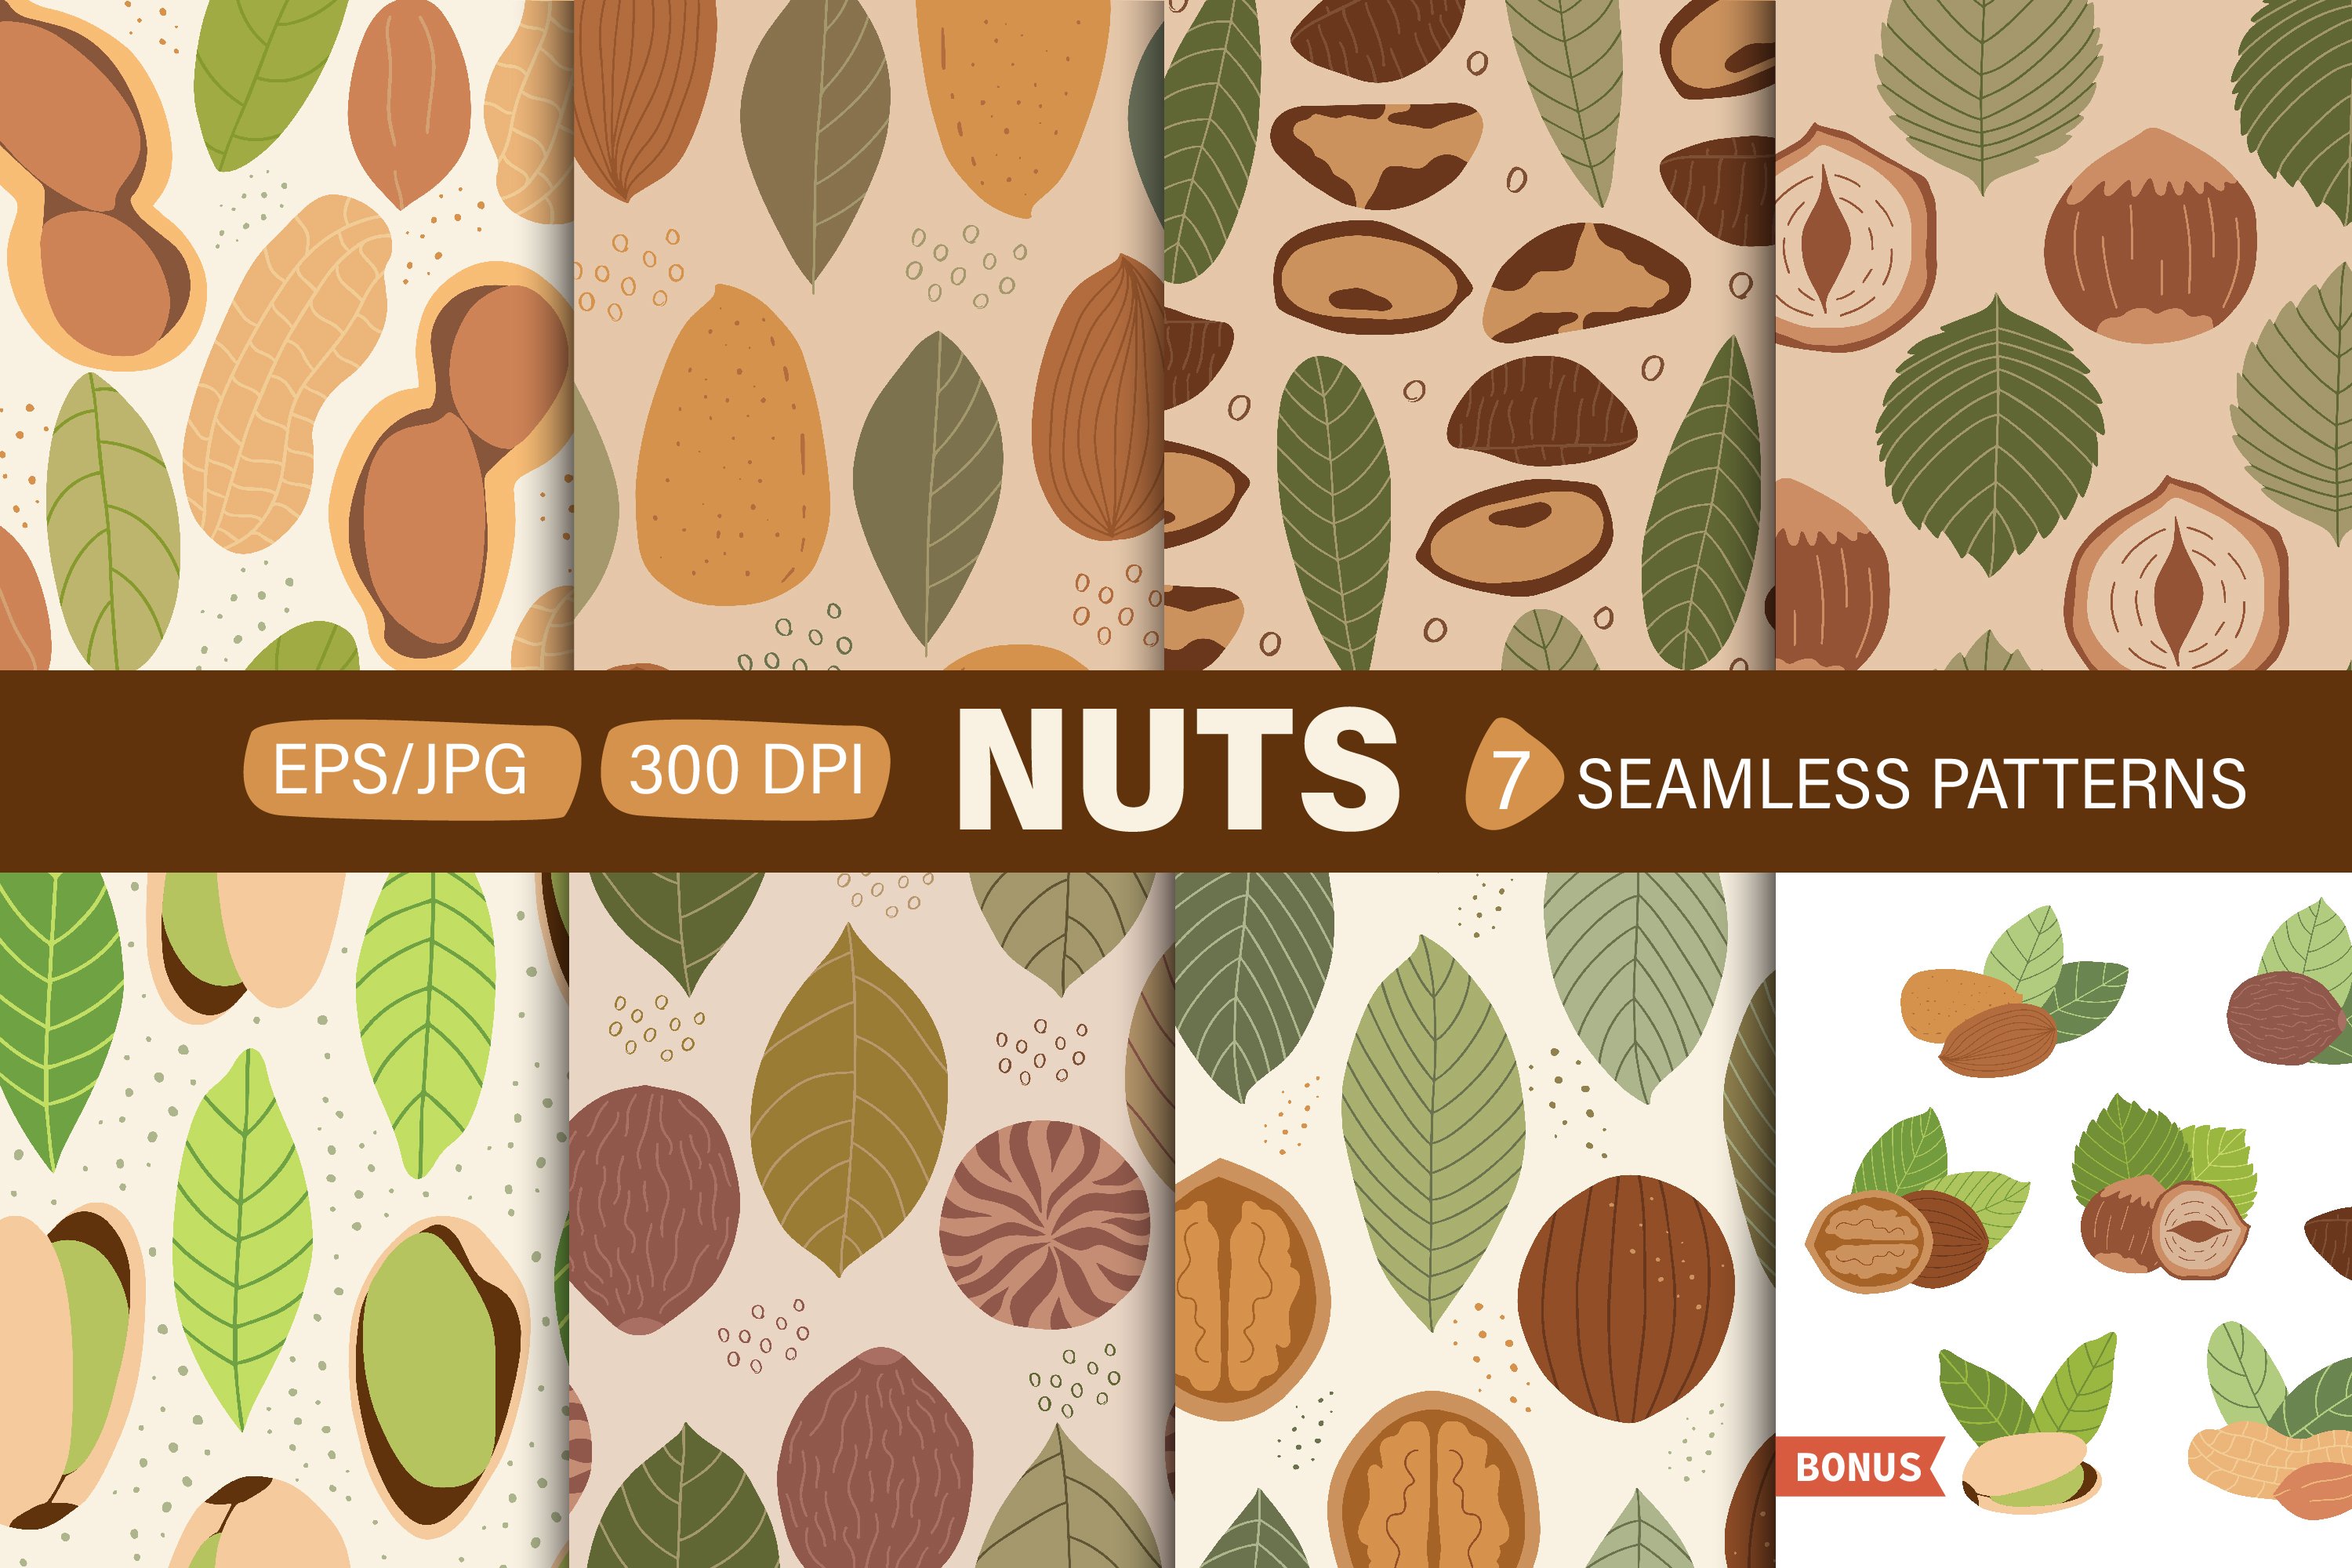 White lettering "NUTS" and 8 different seamless patterns with nuts.